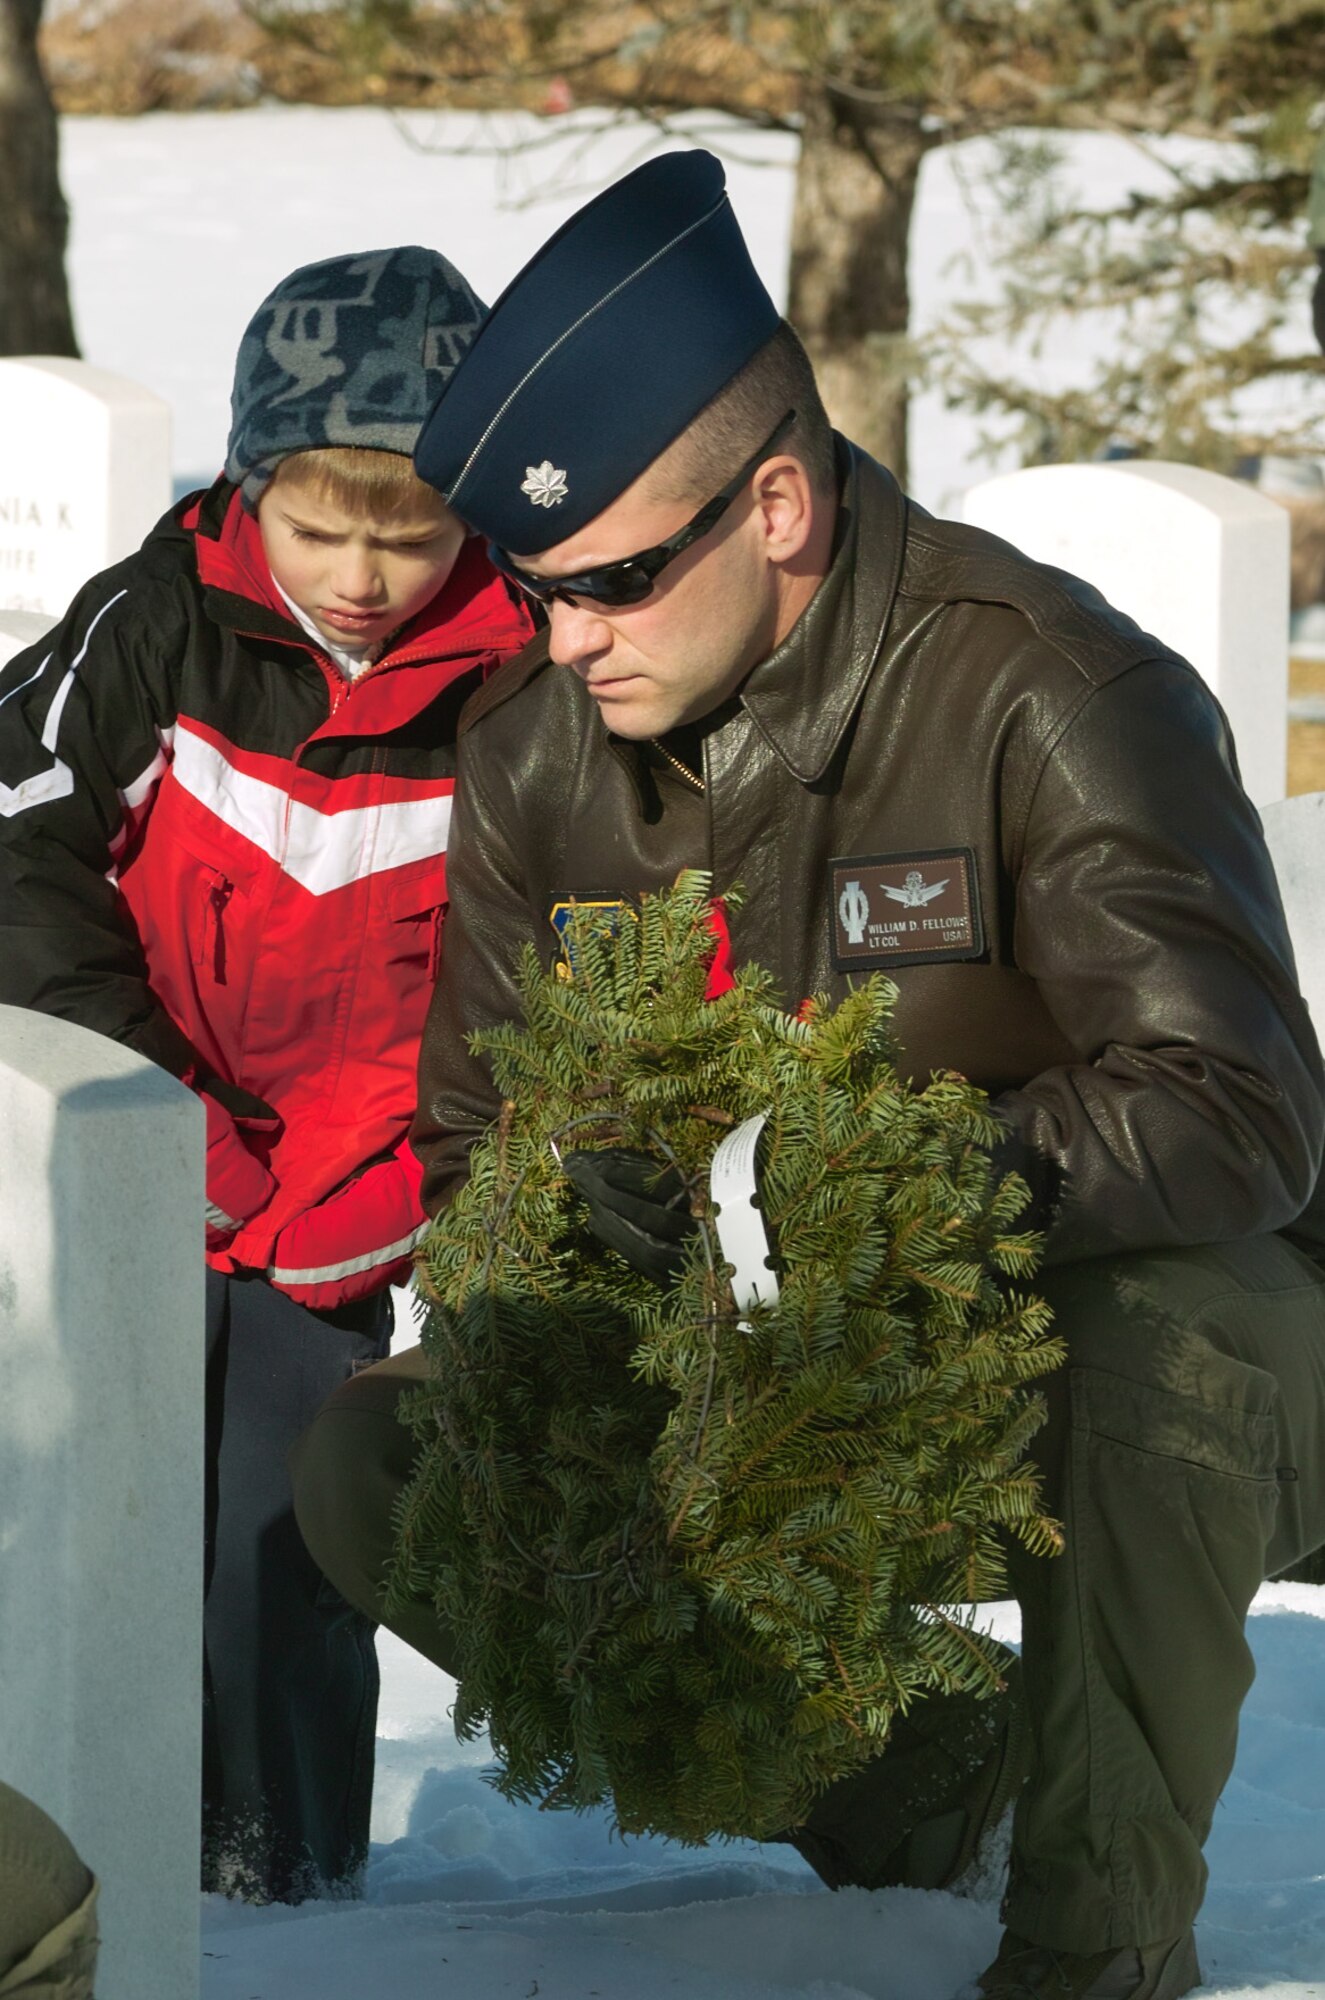 Lt. Col. William Fellows from Schriever Air Force Base, Colo., lays a wreath during Wreaths Across America Dec. 12 at Fort Logan National Cemetary in Littleton, Colo. The Wreaths Across America program is run by the Civil Air Patrol. CAP members and volunteers from local military installations lay wreaths on graves in veterans' cemetaries nationwide. (U.S. Air Force photo by Master Sgt. Steven Clark)